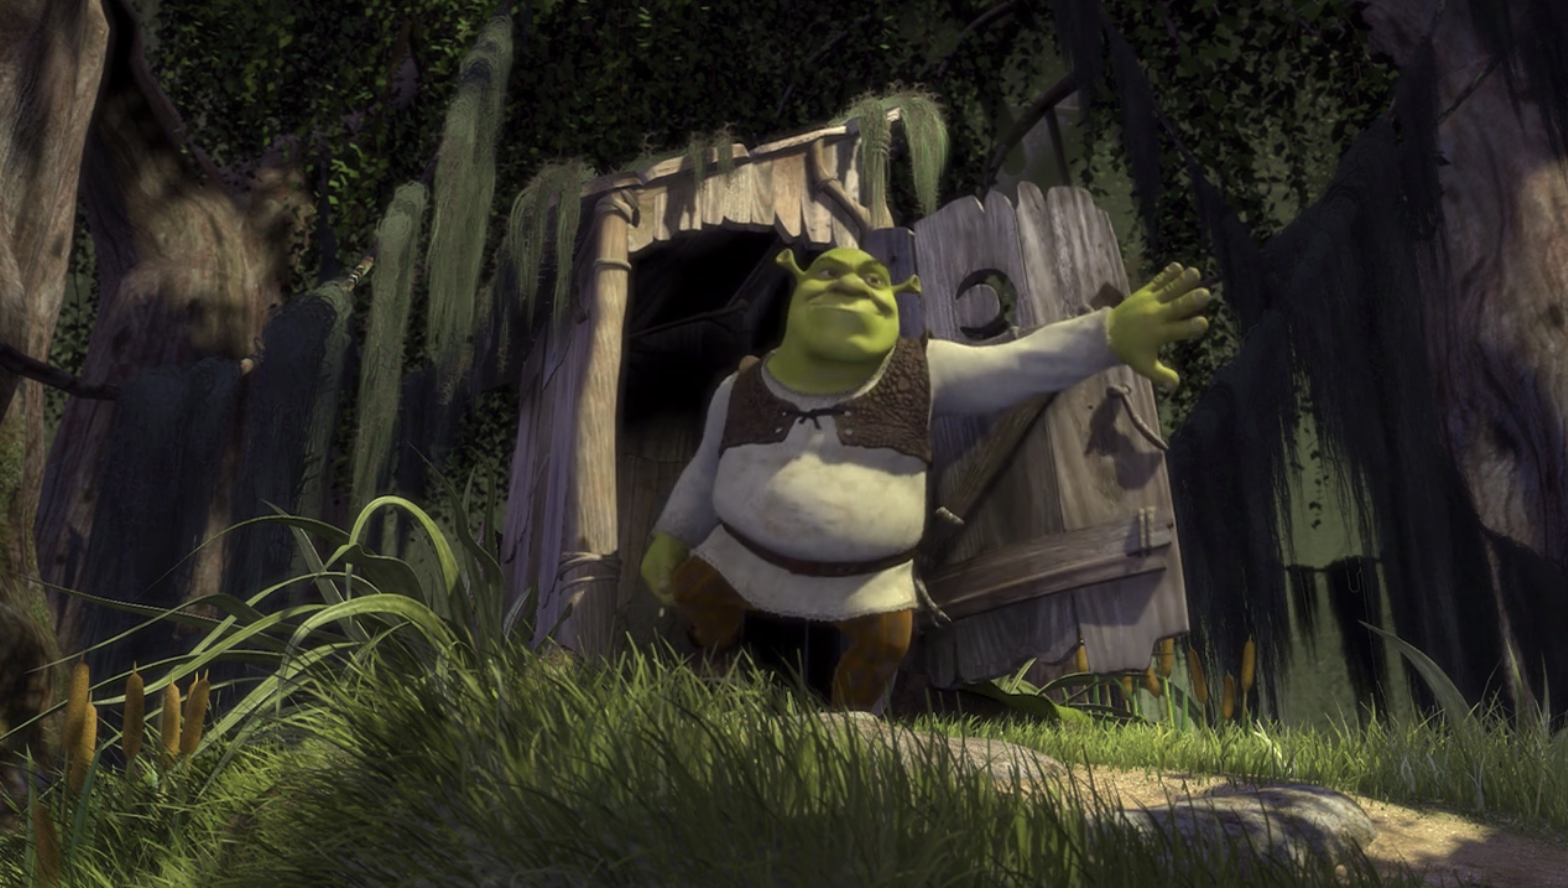 Shrek exiting his outhouse 